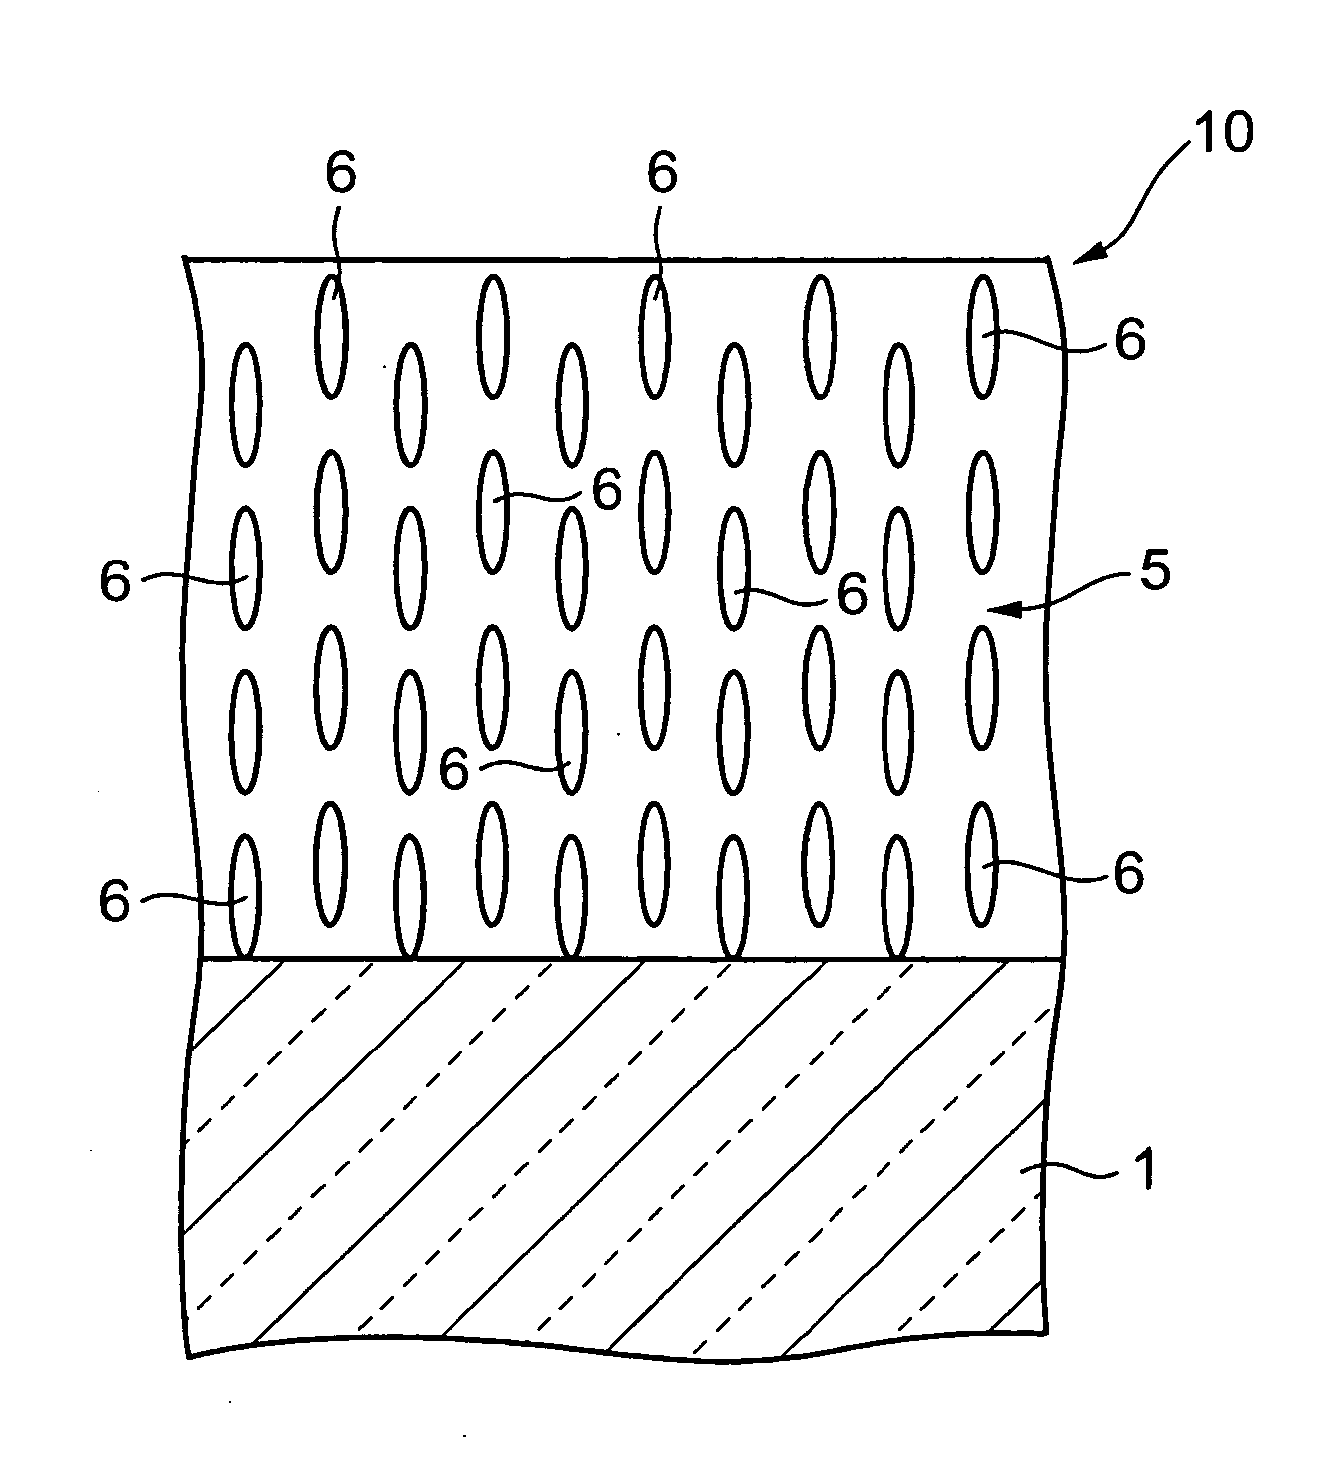 Optical element, process for producing the same, substrate for liquid crystal alignment, liquid crystal display device, and birefringent material